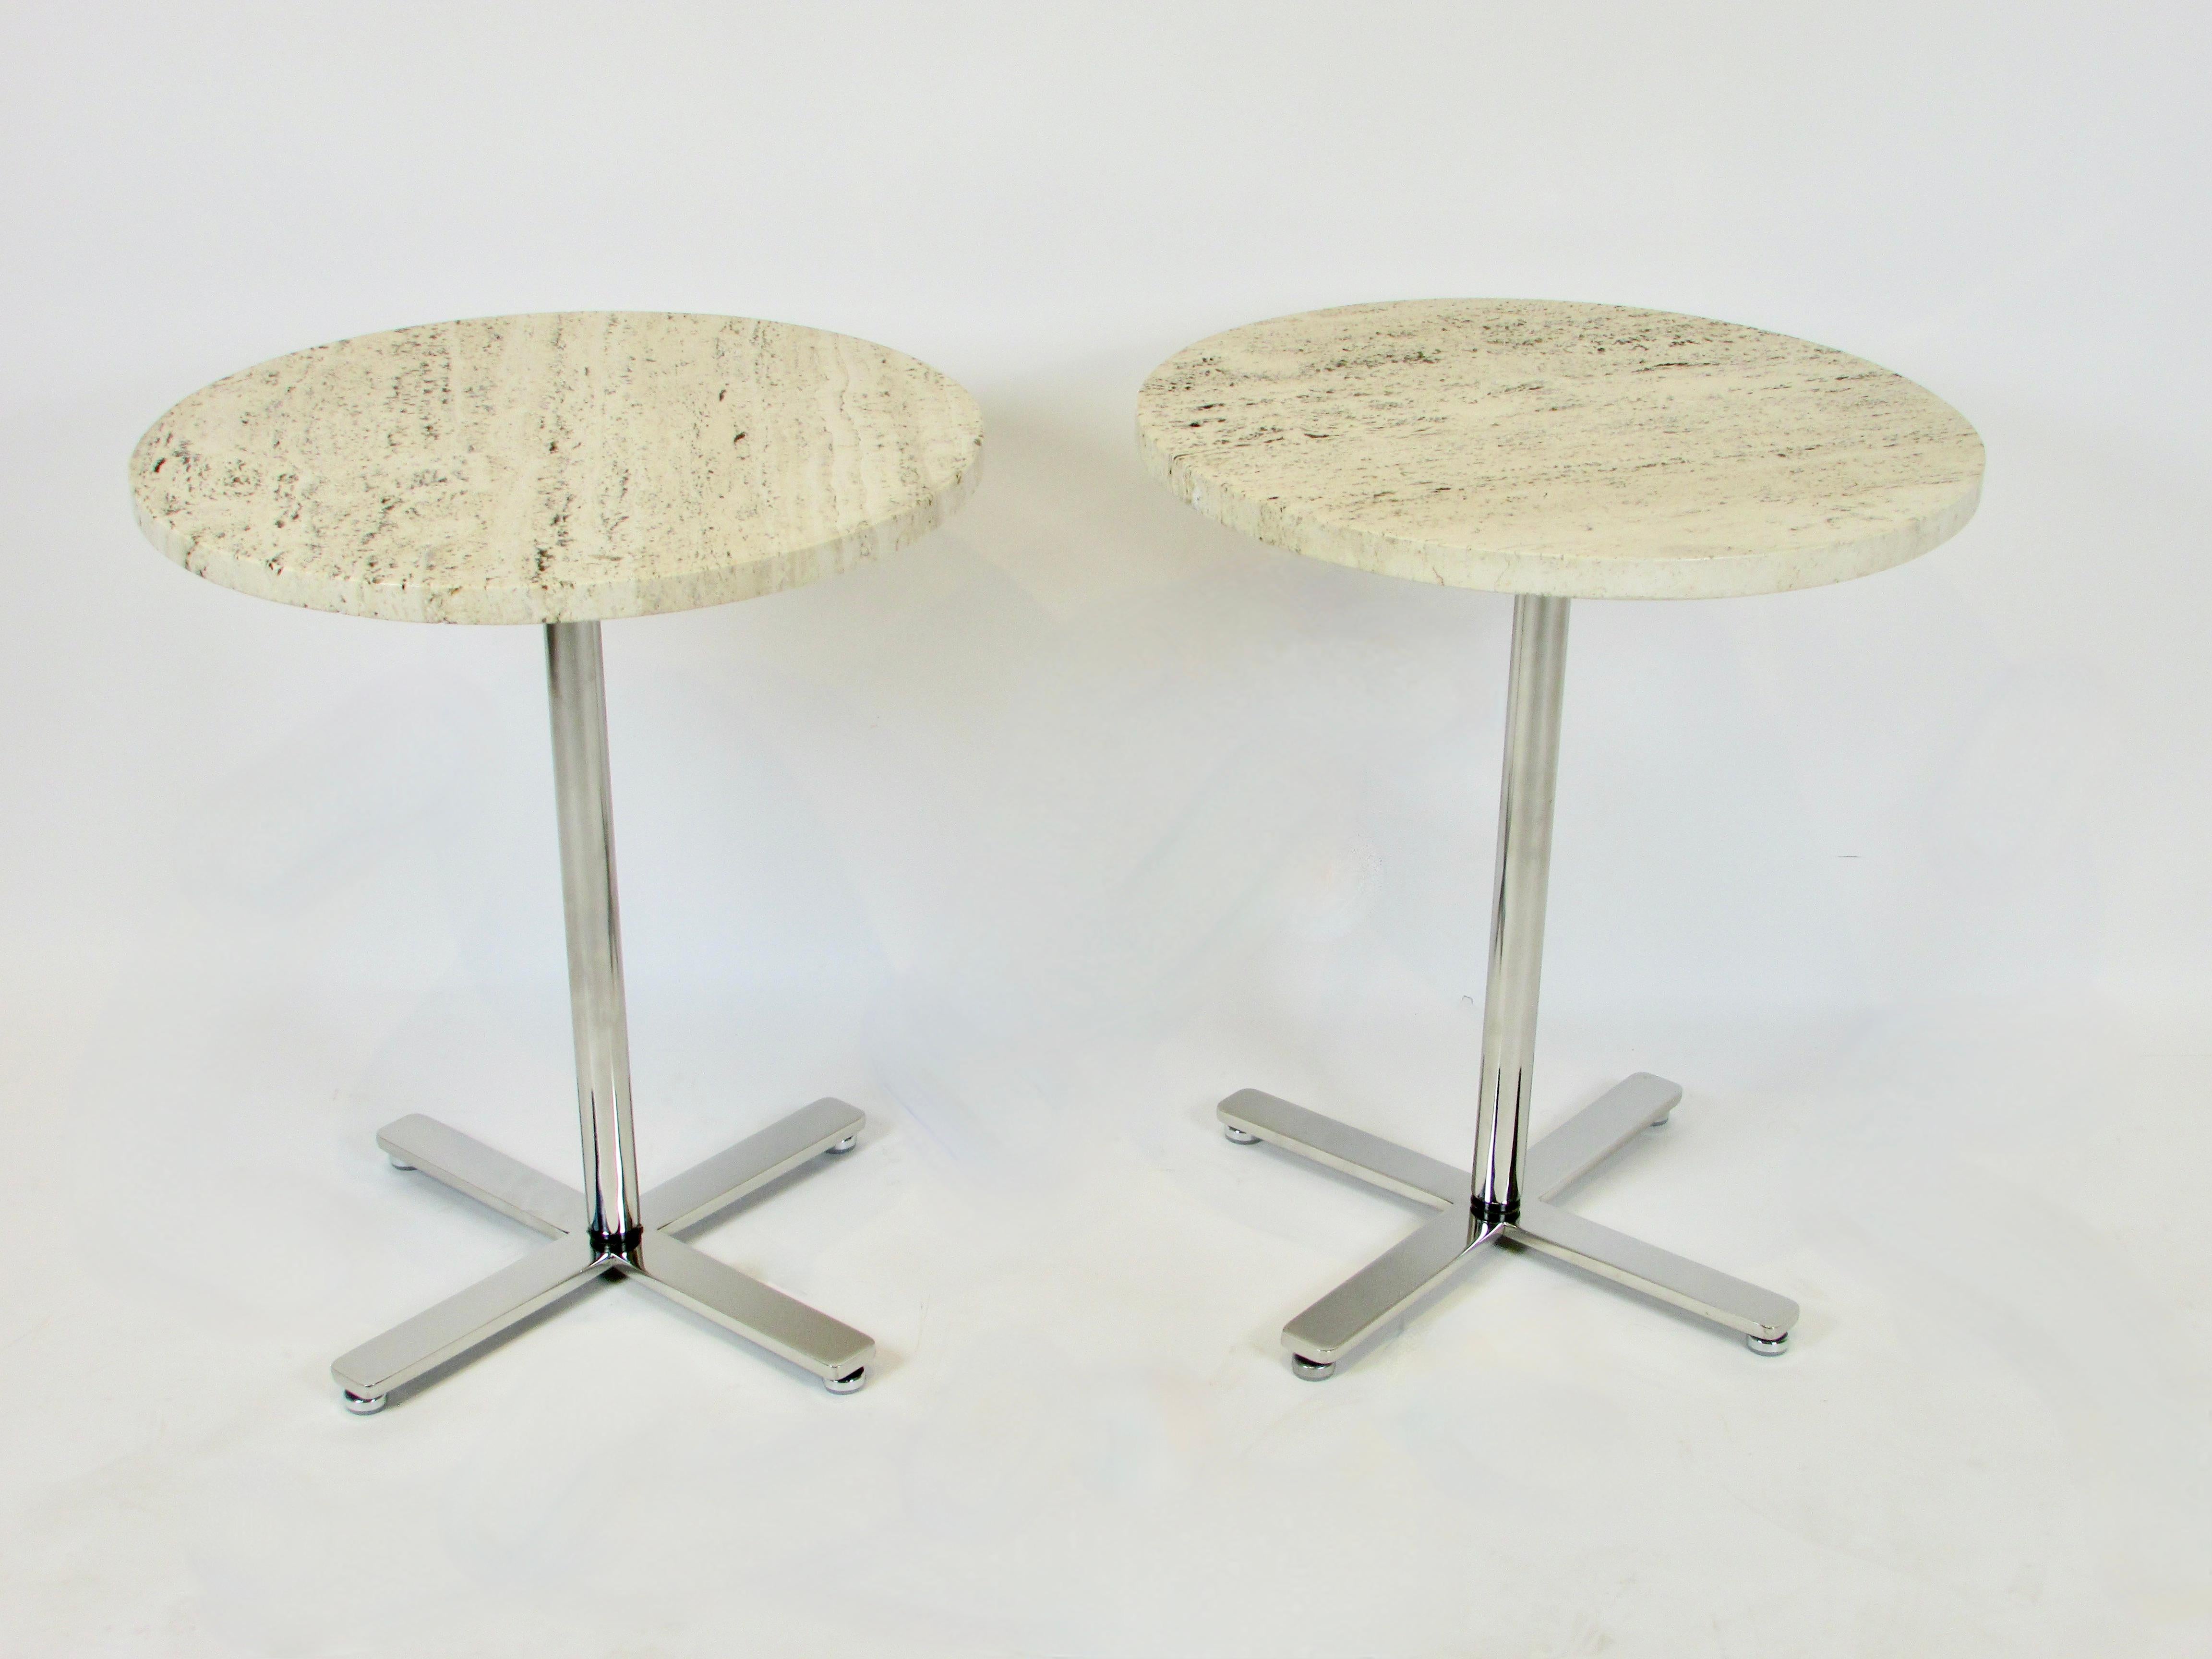 20th Century Pair of Helikon Open Grain Travertine Marble on Stainless Steel Base Tables For Sale